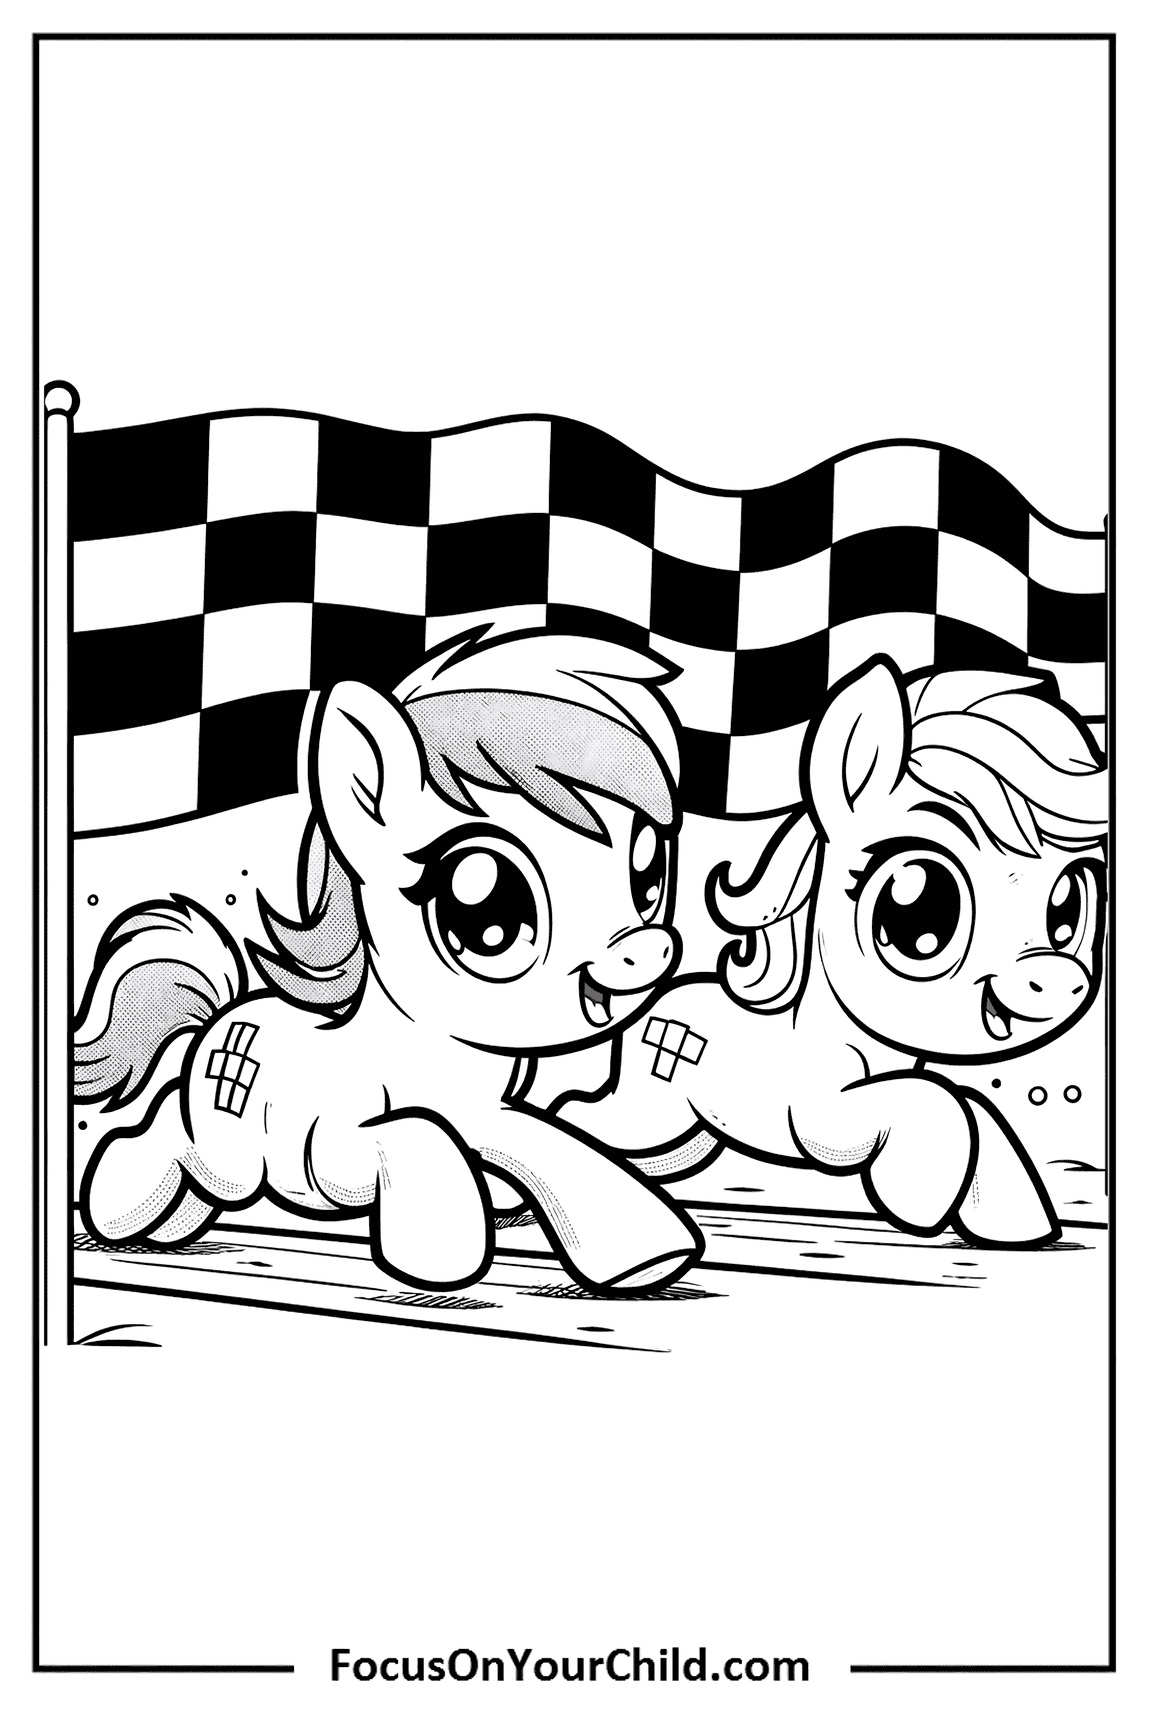 Two animated ponies racing towards the checkered flag in a fun and competitive event.